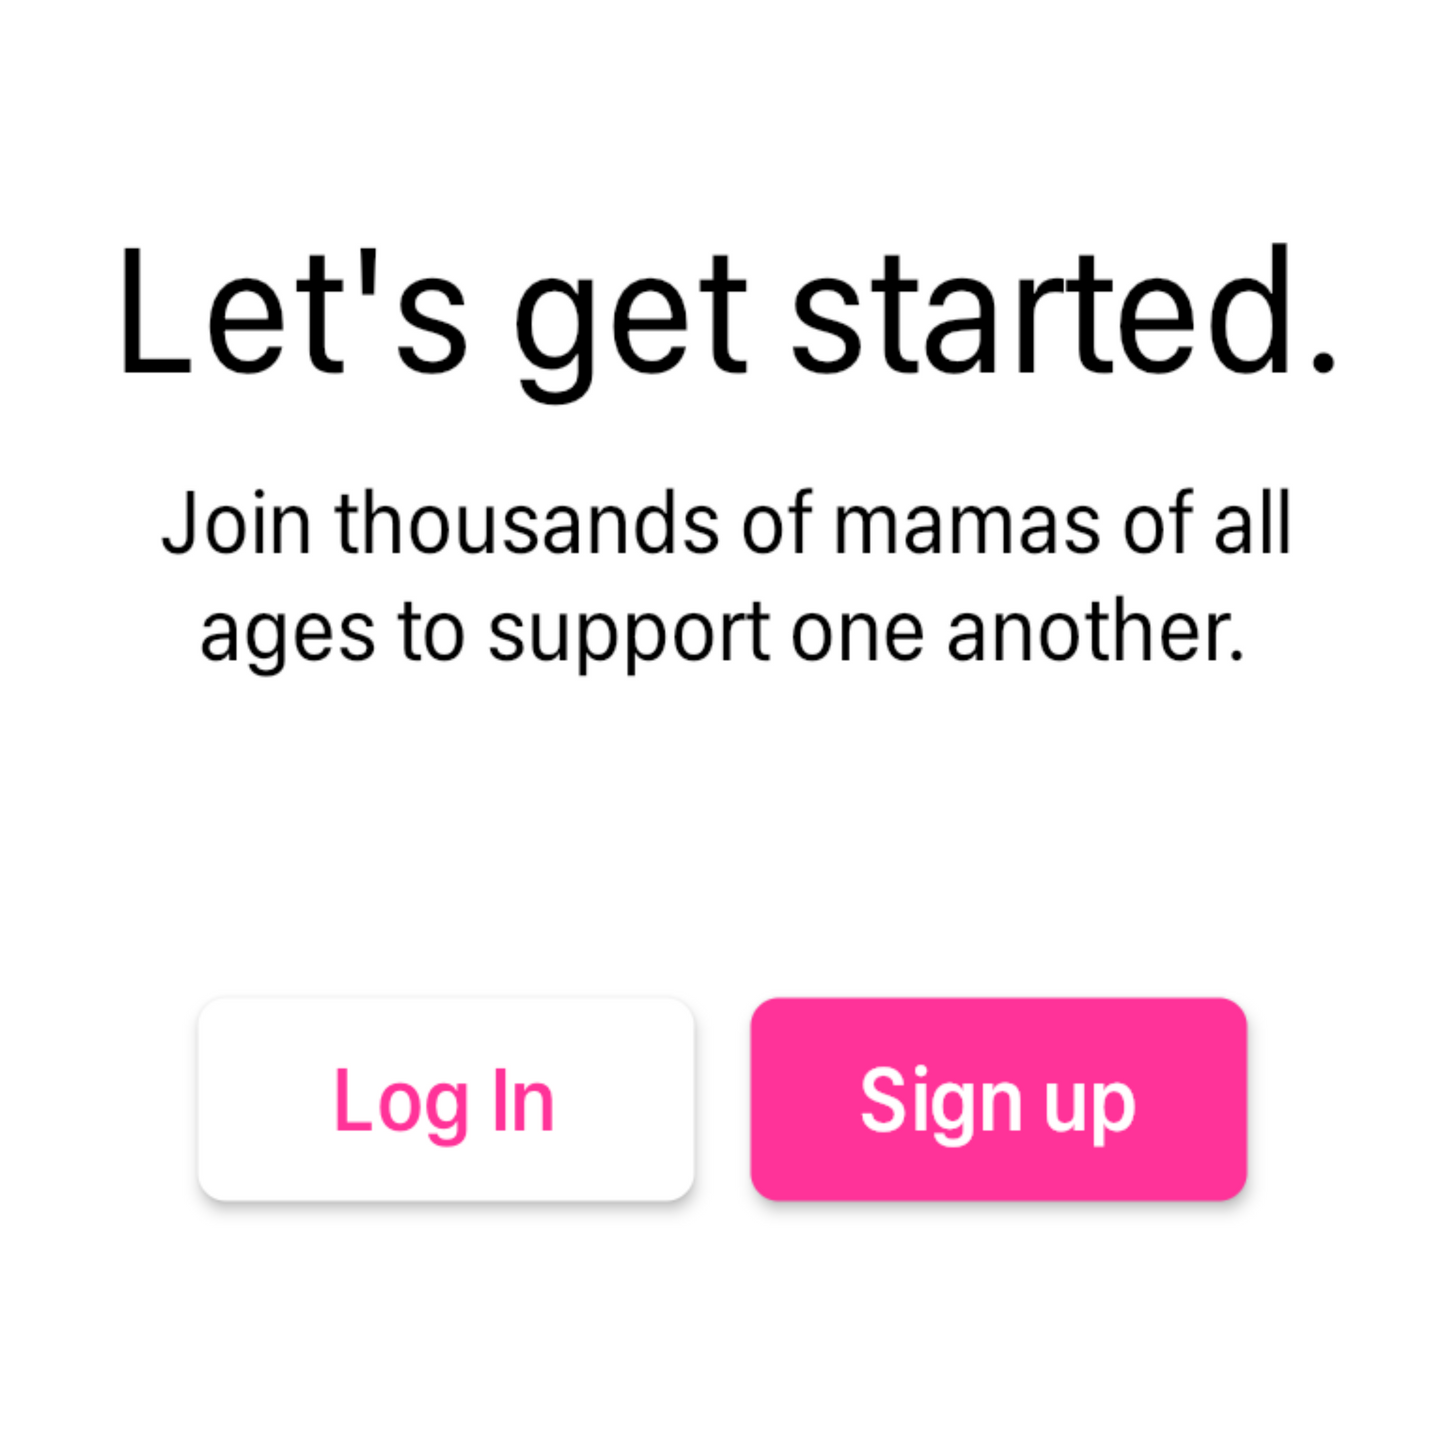 Image of the Log In/ Sign Up page in Mamasoup that says, "Let's get started. Join thousands of mamas of all ages to support one another."